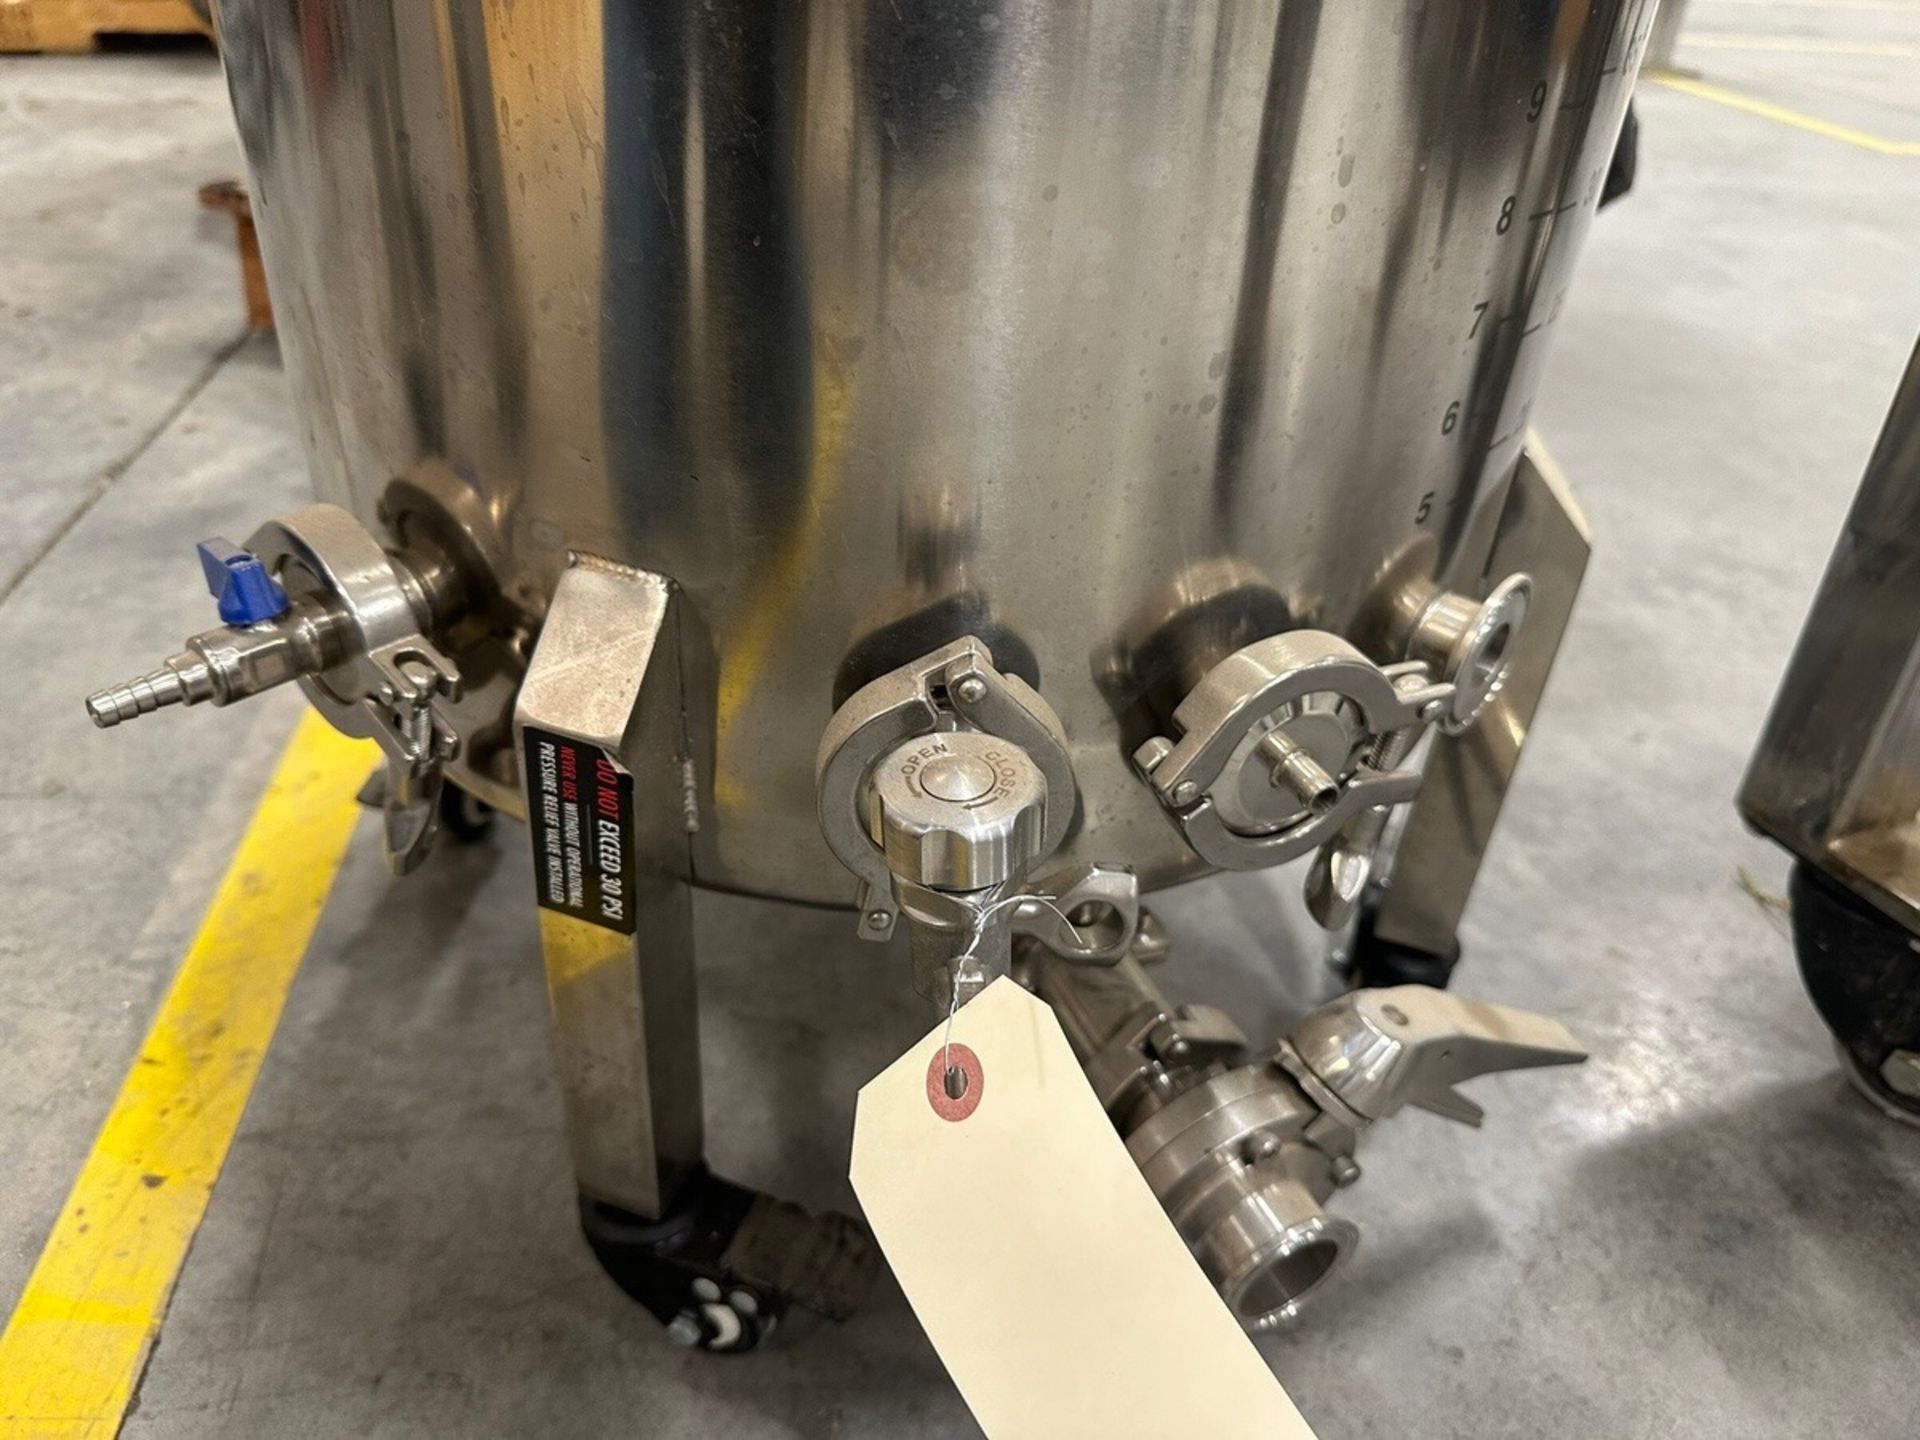 Brew Tech Stainless Steel Vessel | Rig Fee $75 - Image 2 of 5